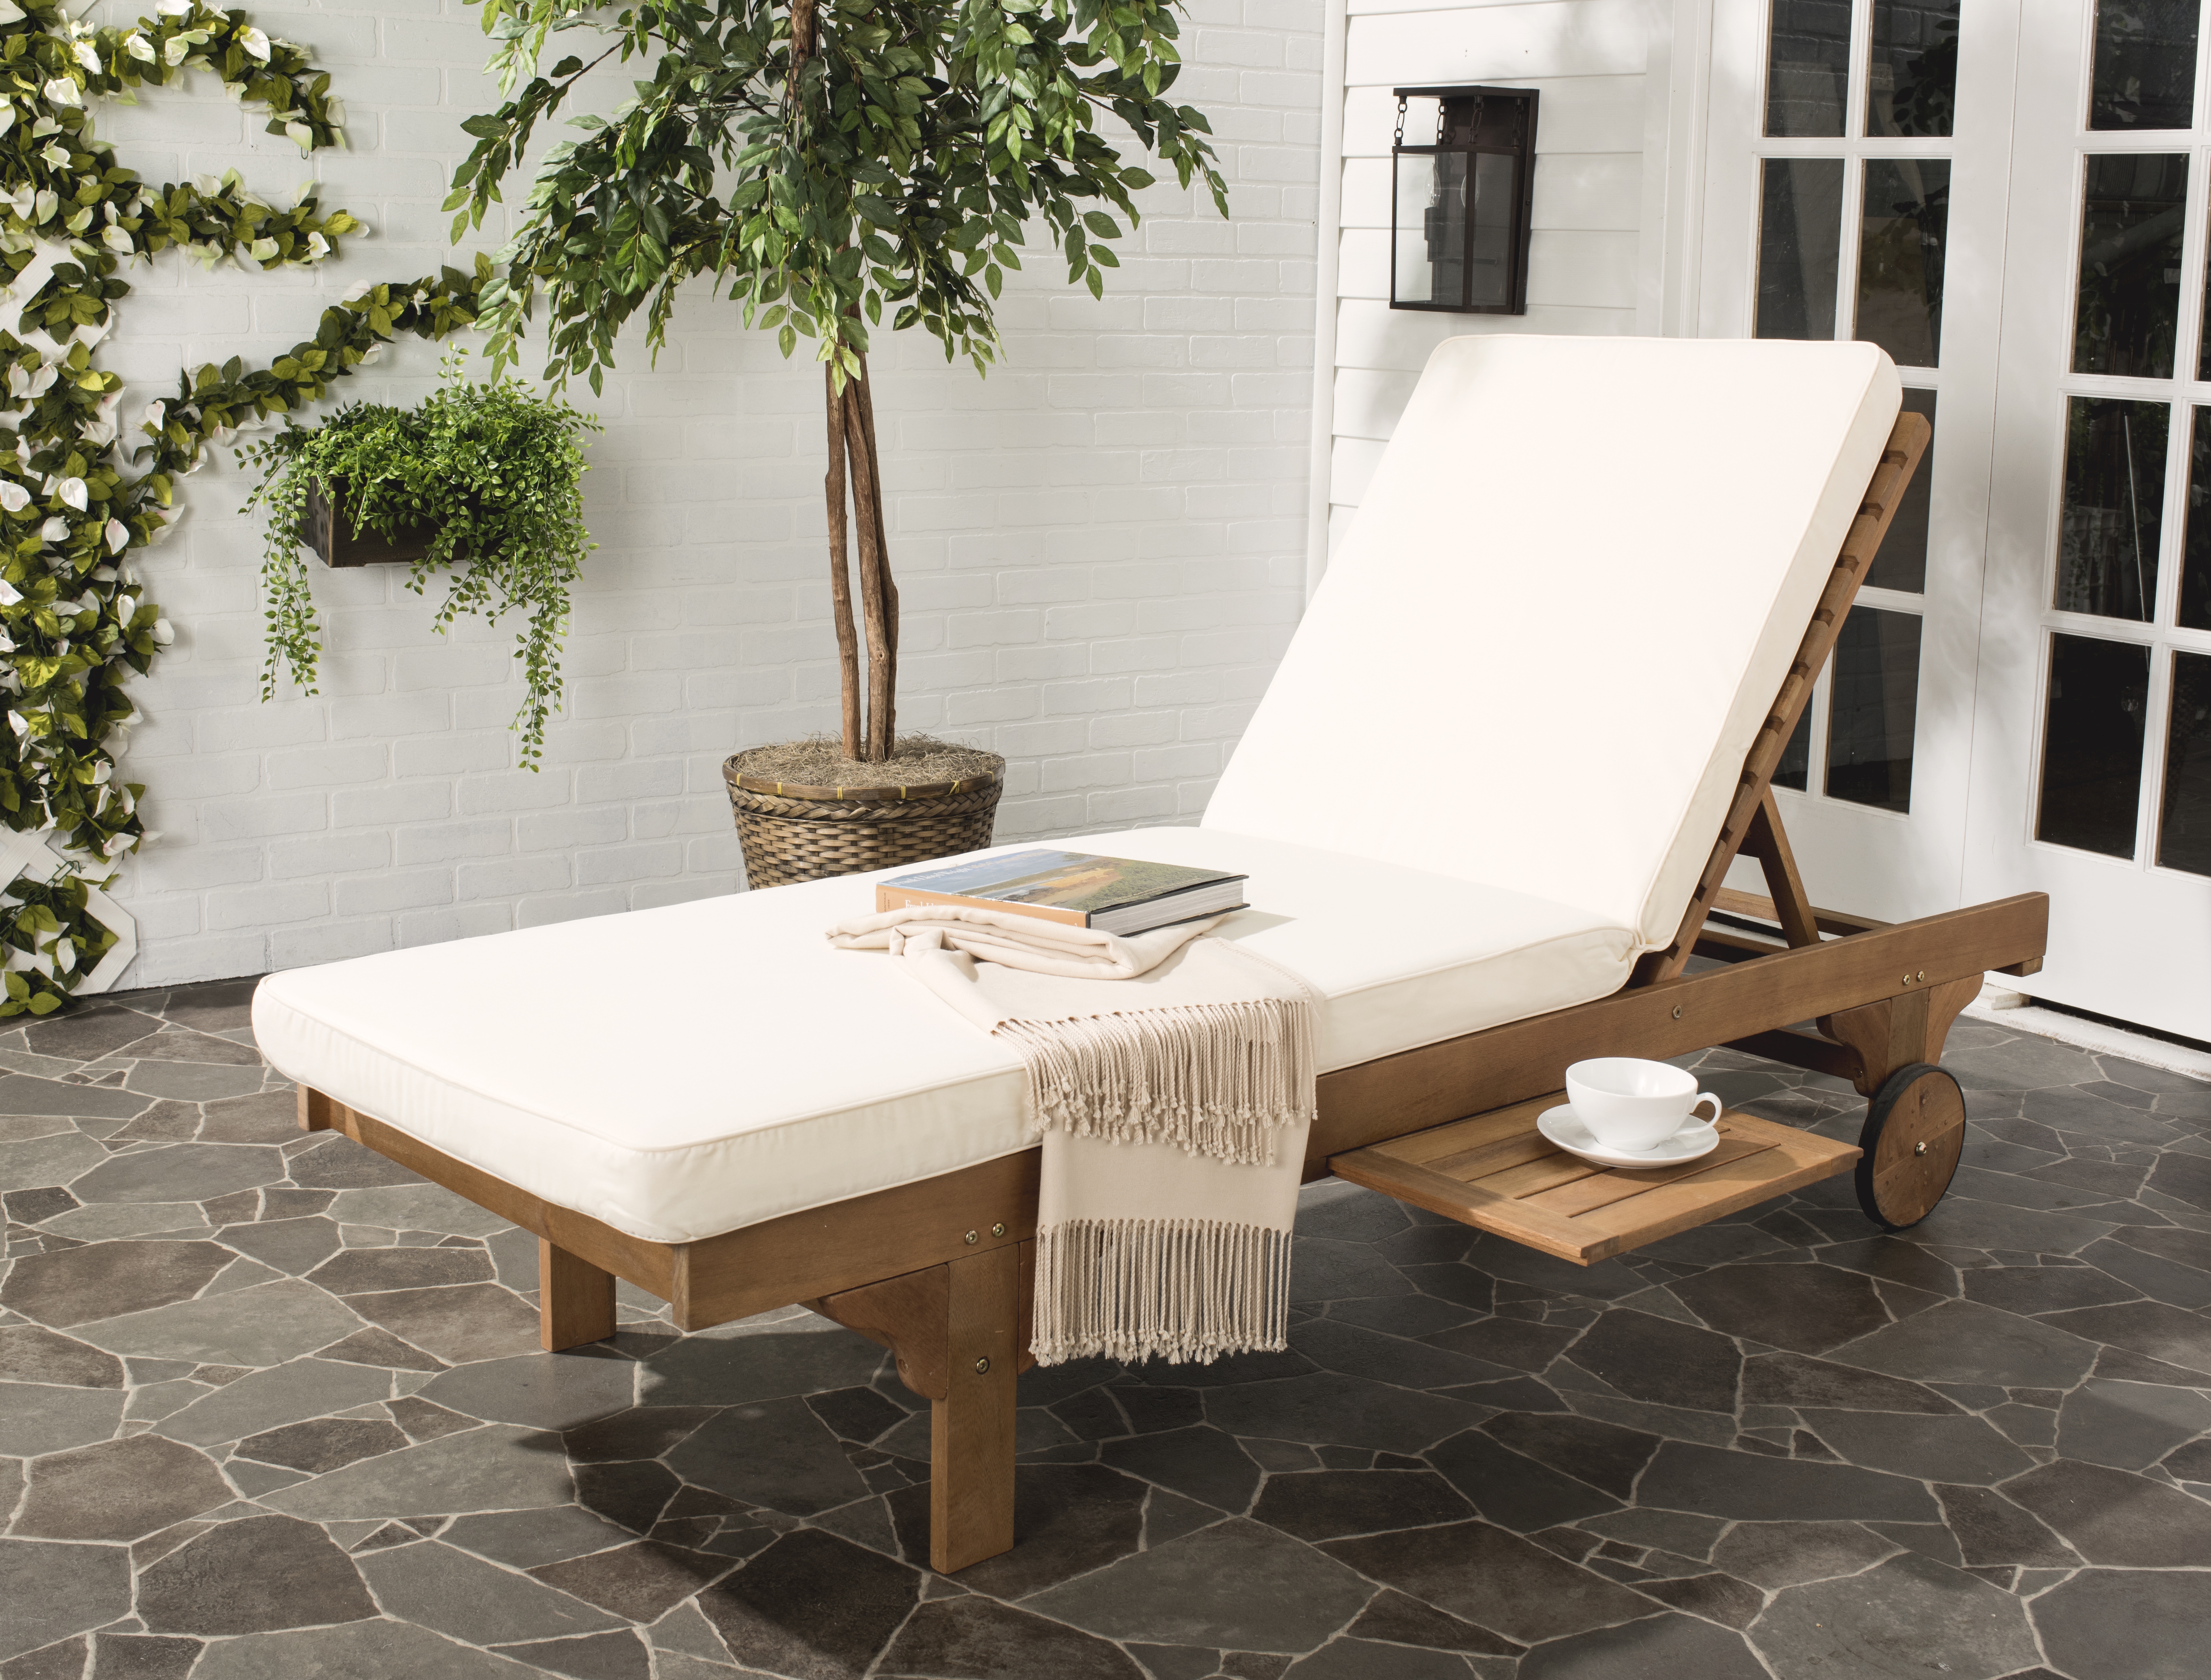 Newport Chaise Lounge Chair With Side Table - Natural/Beige - Safavieh - Image 4